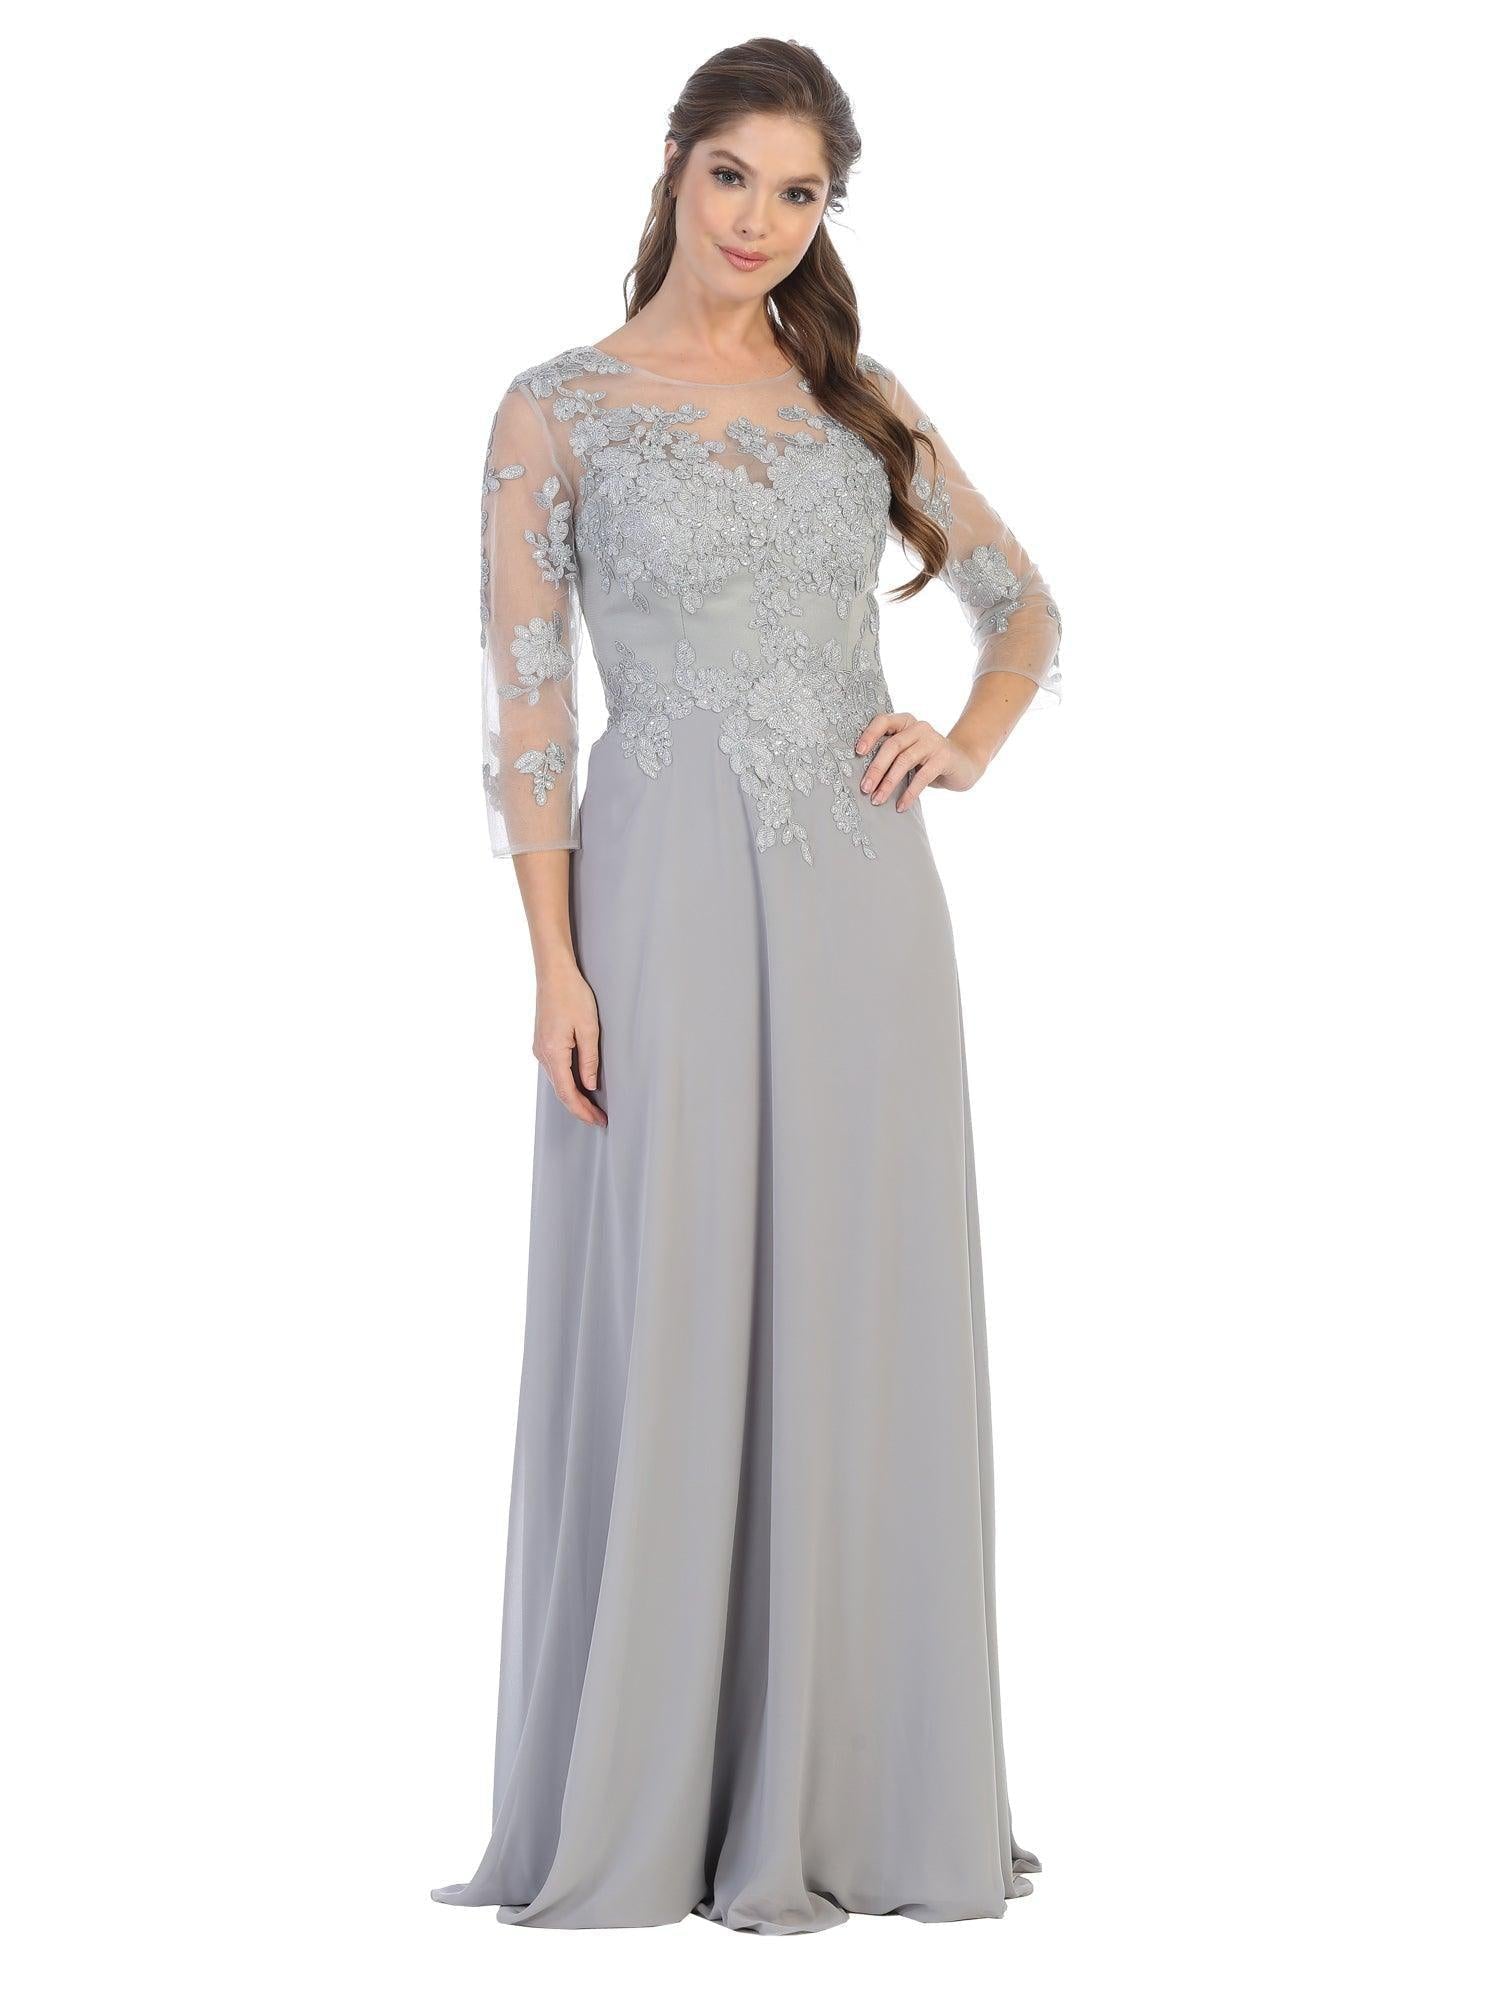 Long Mother of the Bride Formal Chiffon Dress Sale - The Dress Outlet